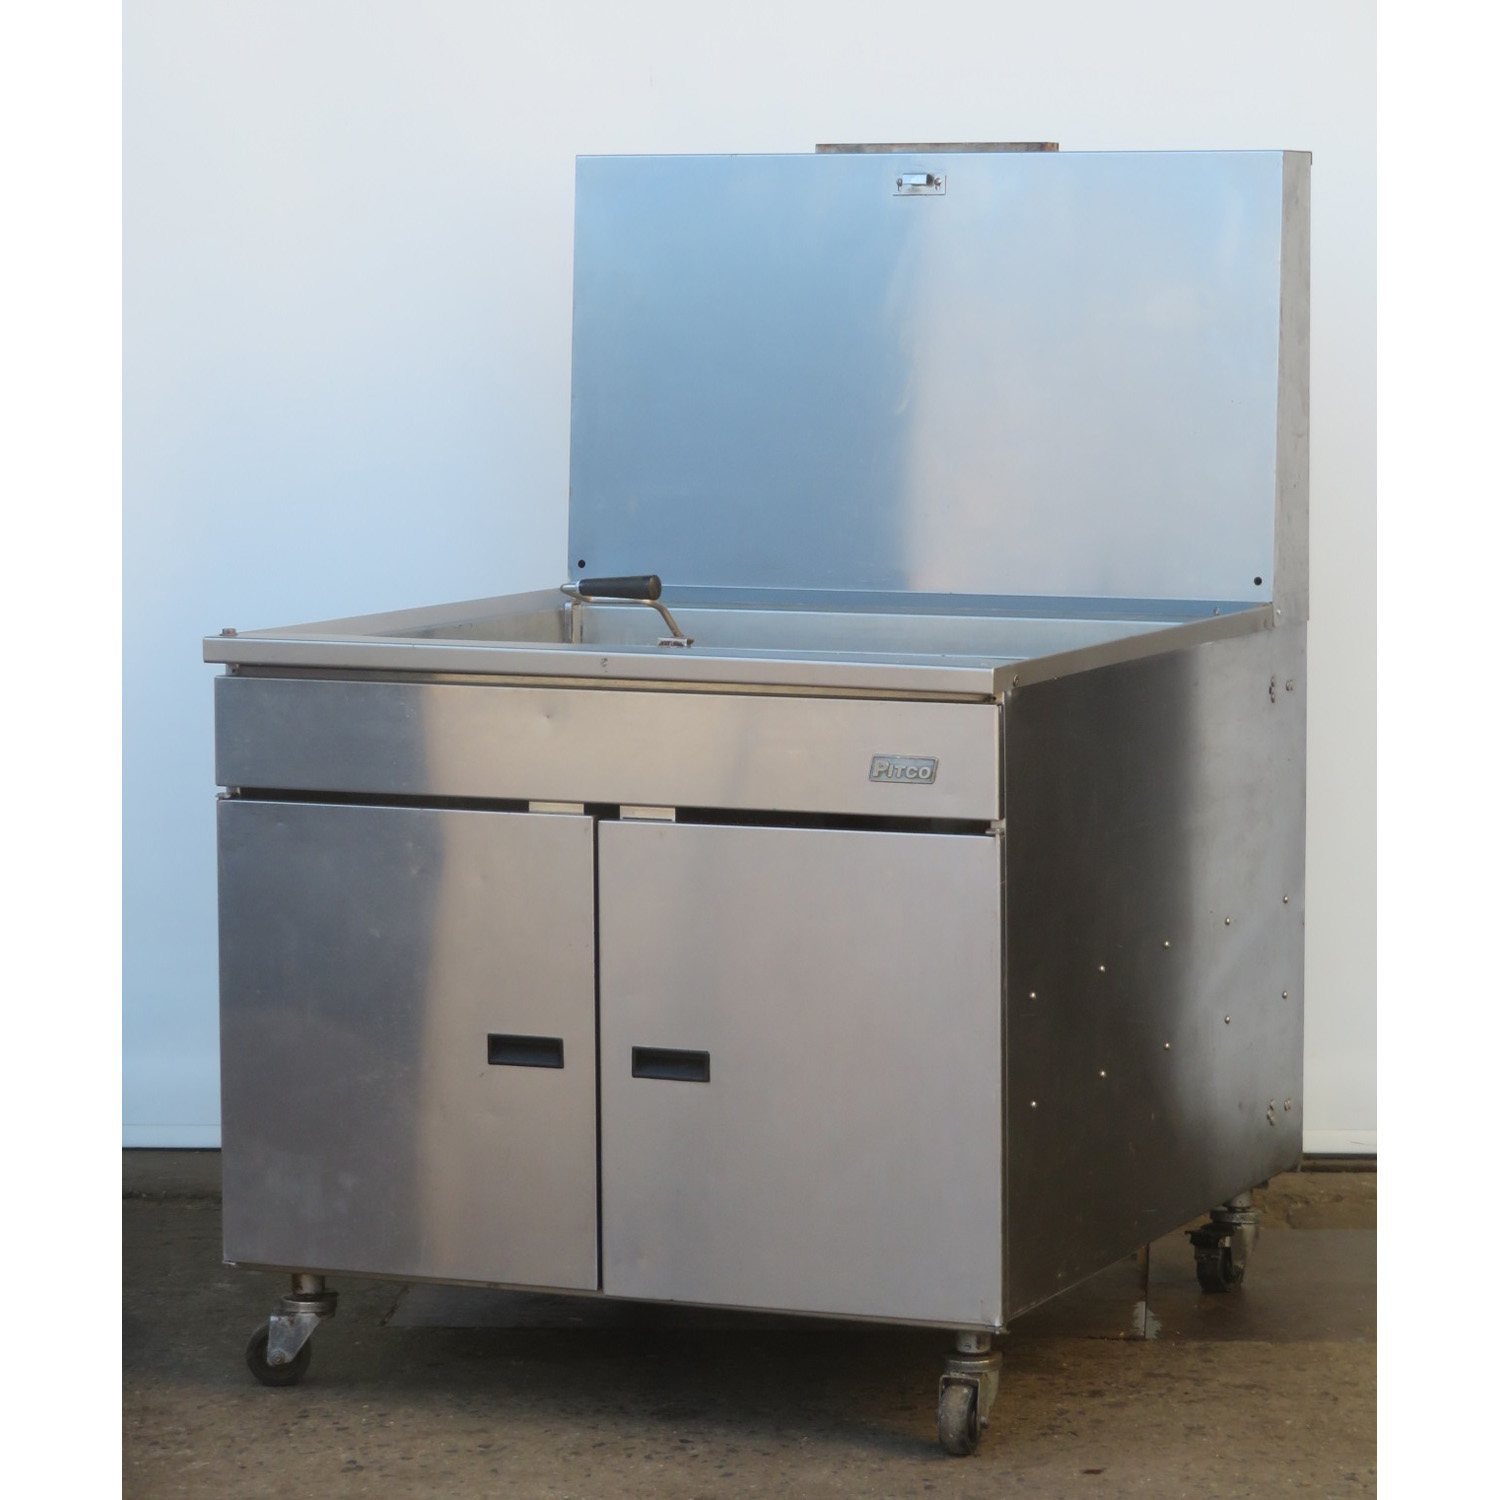 Pitco 34PSS Gas Donut Fryer, Used Excellent Condition